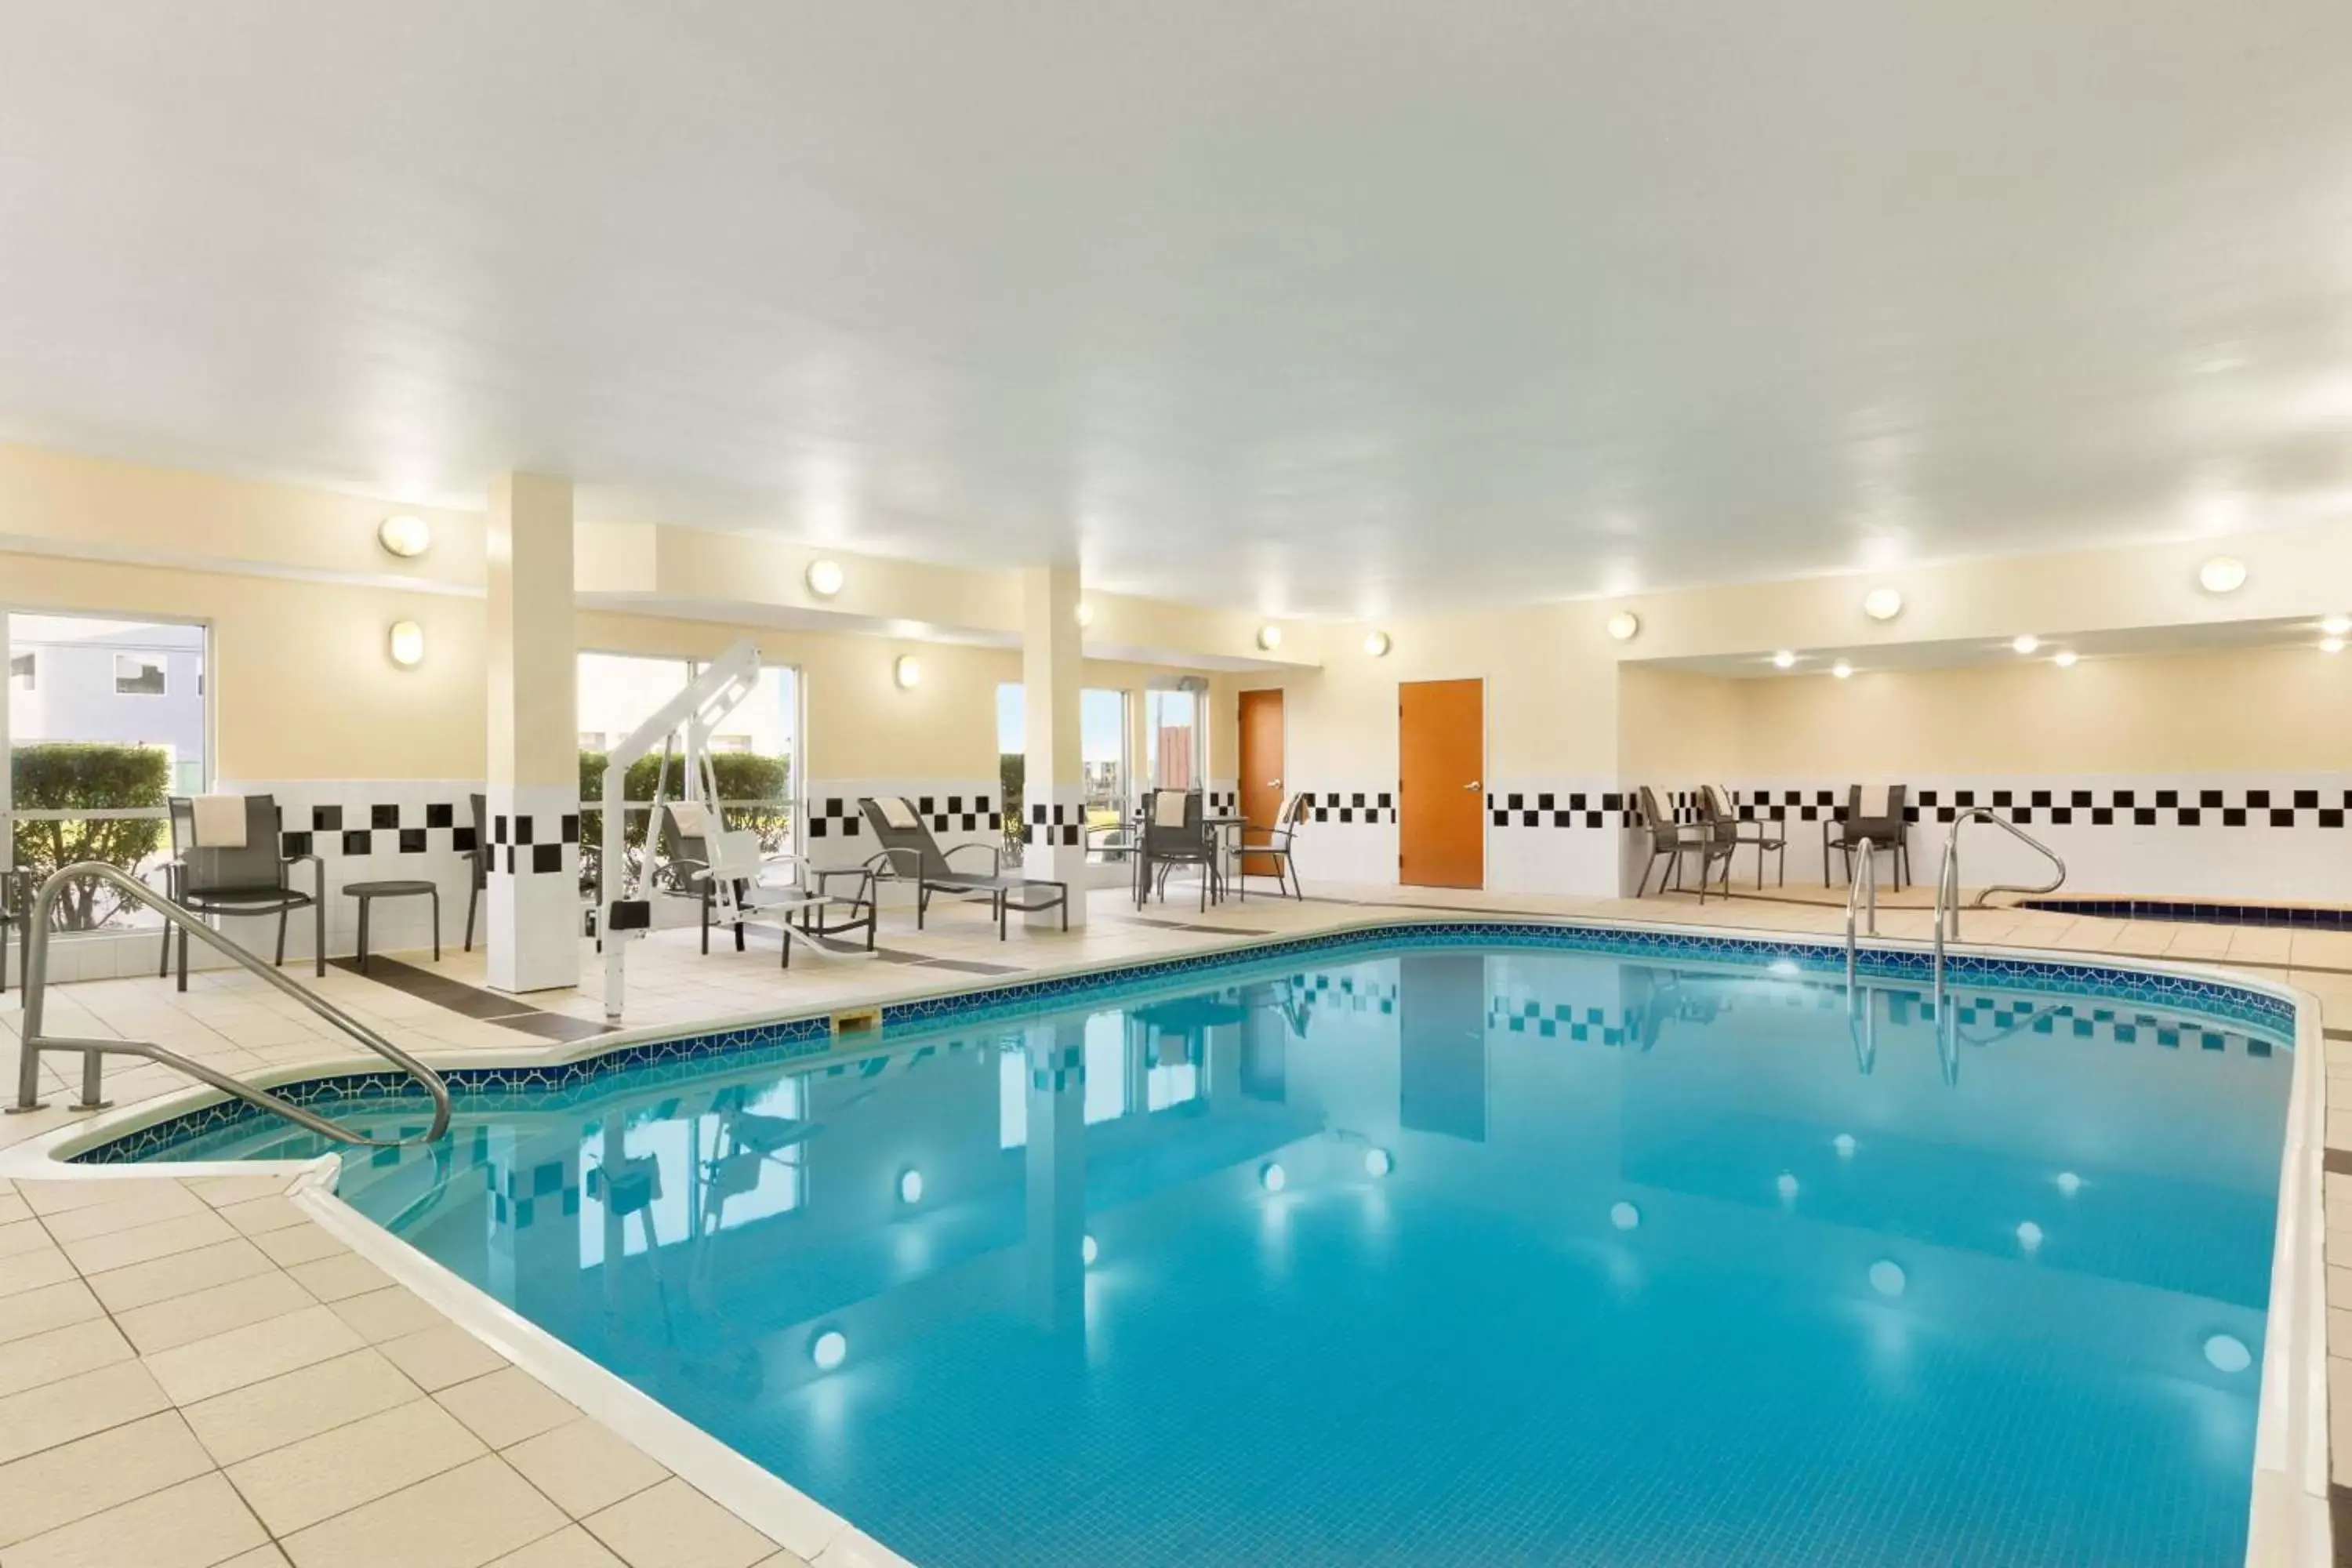 Swimming Pool in Fairfield by Marriott Inn & Suites Houston North/Cypress Station